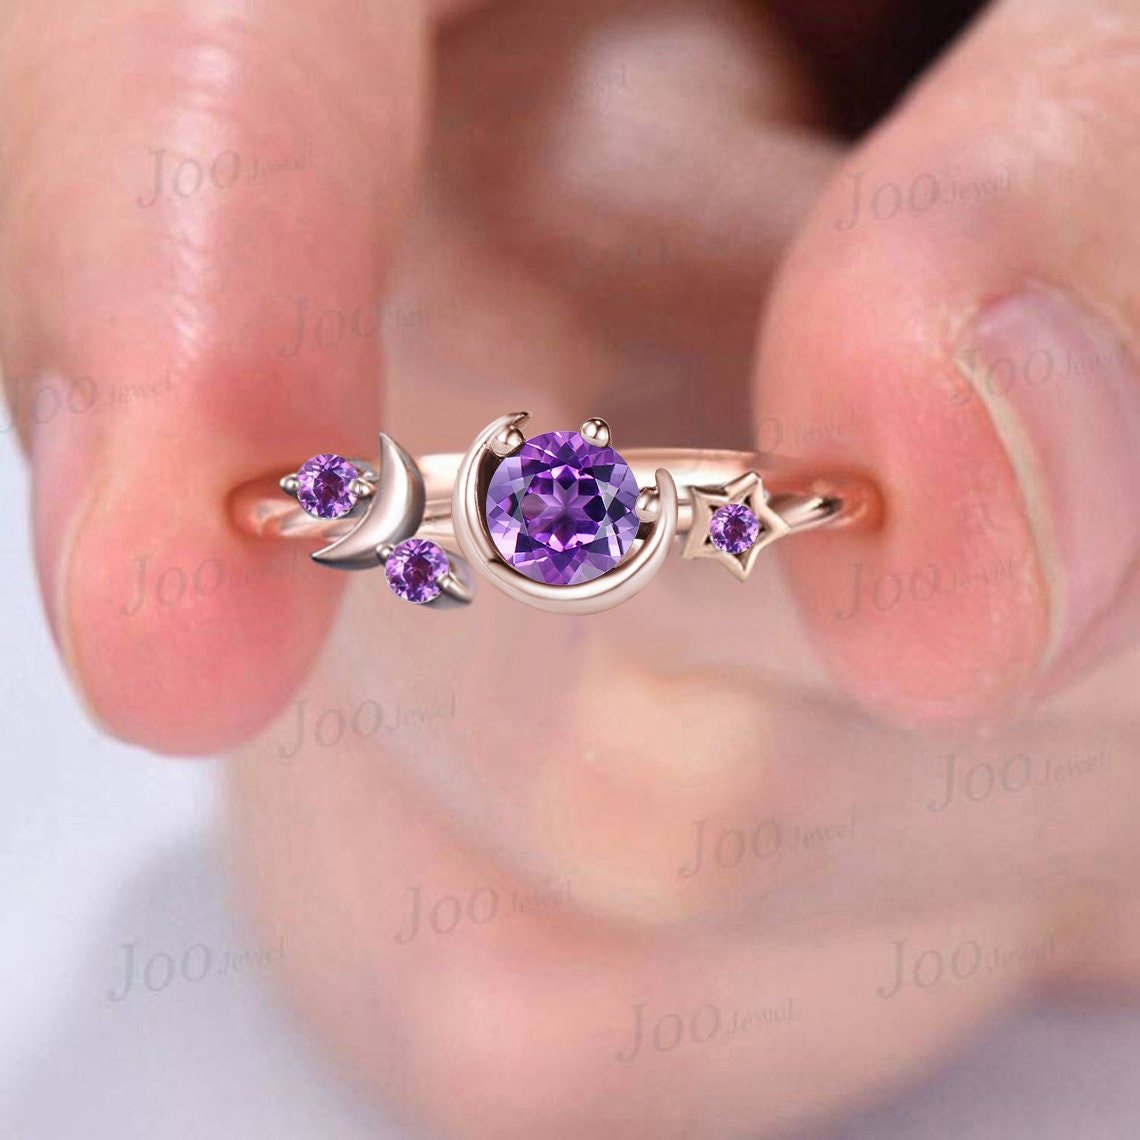 Round Natural Amethyst Wedding Ring Moon Star Cluster Engagement Ring 10K Rose Gold Purple Crystal Celestial Asymmetrical Ring Promise Ring